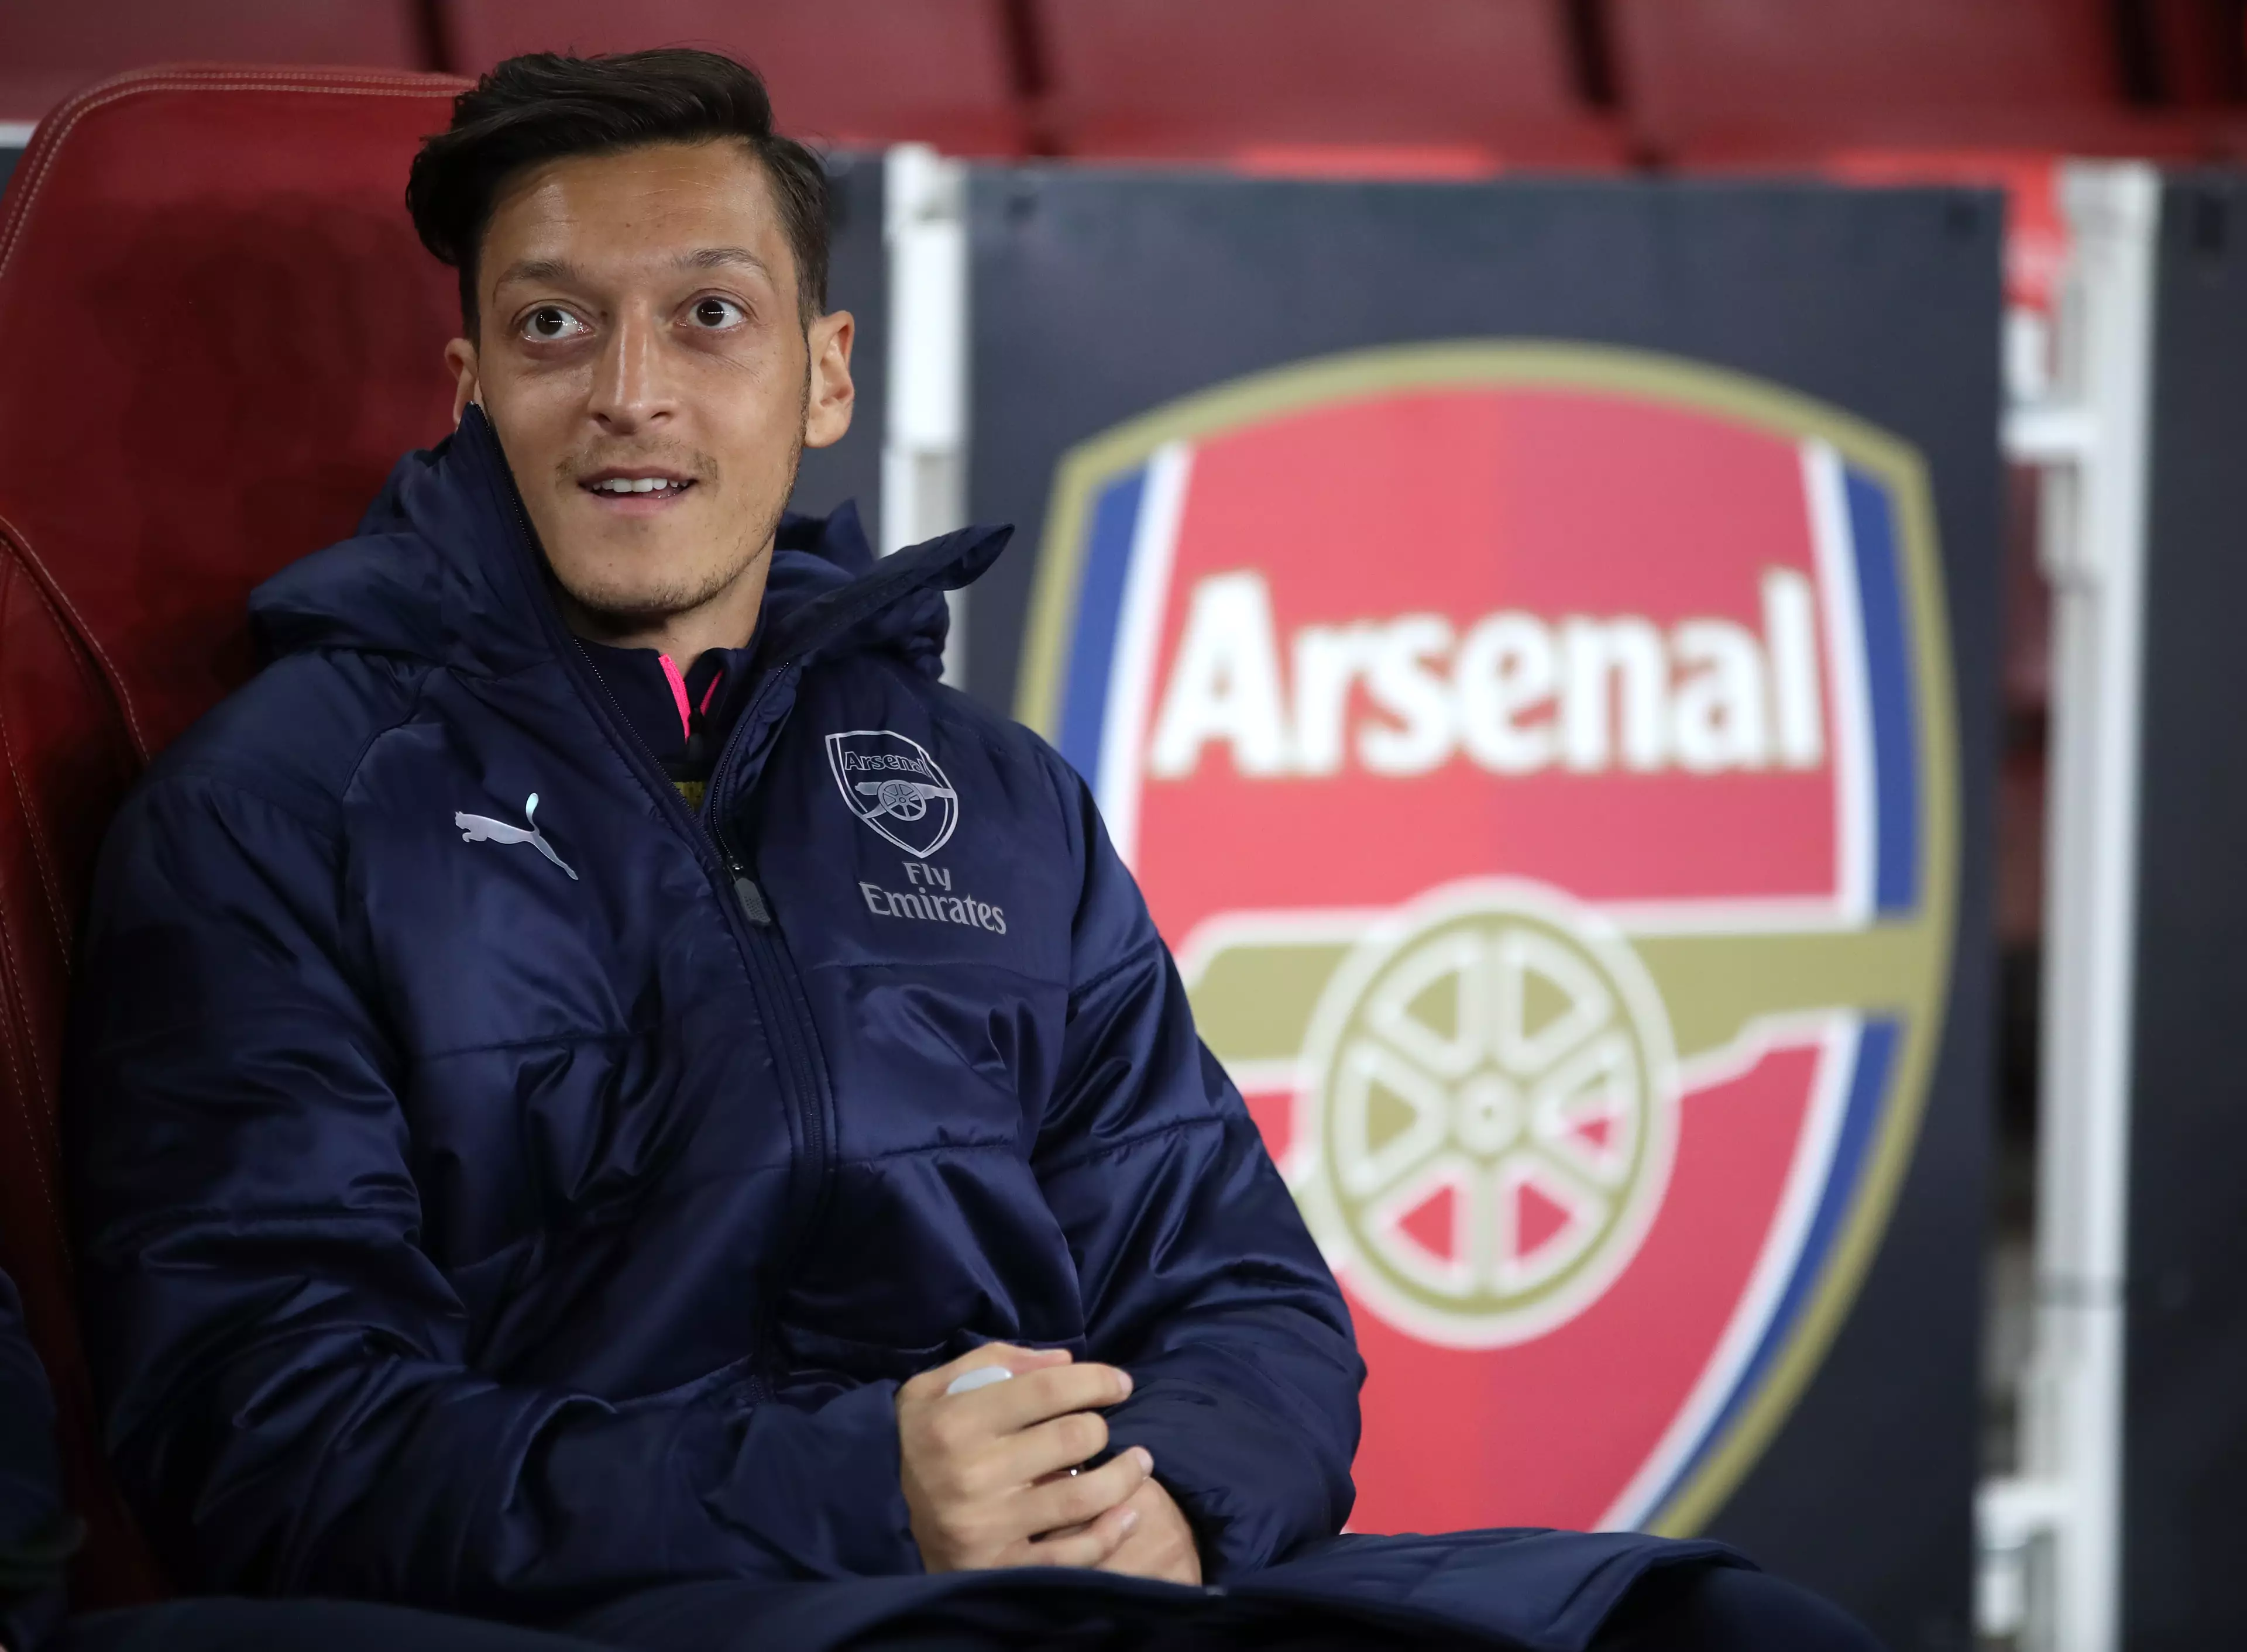 Ozil has had a lot of criticism over the years at the Emirates. Image: PA Images